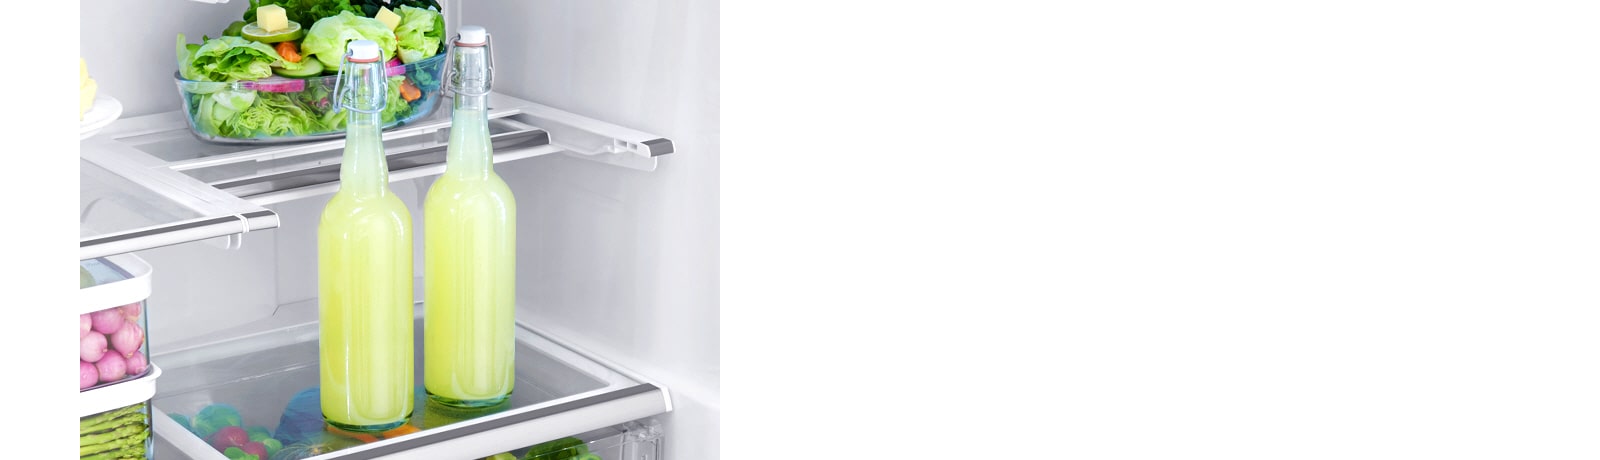 Retractable Shelf to store Tall items1